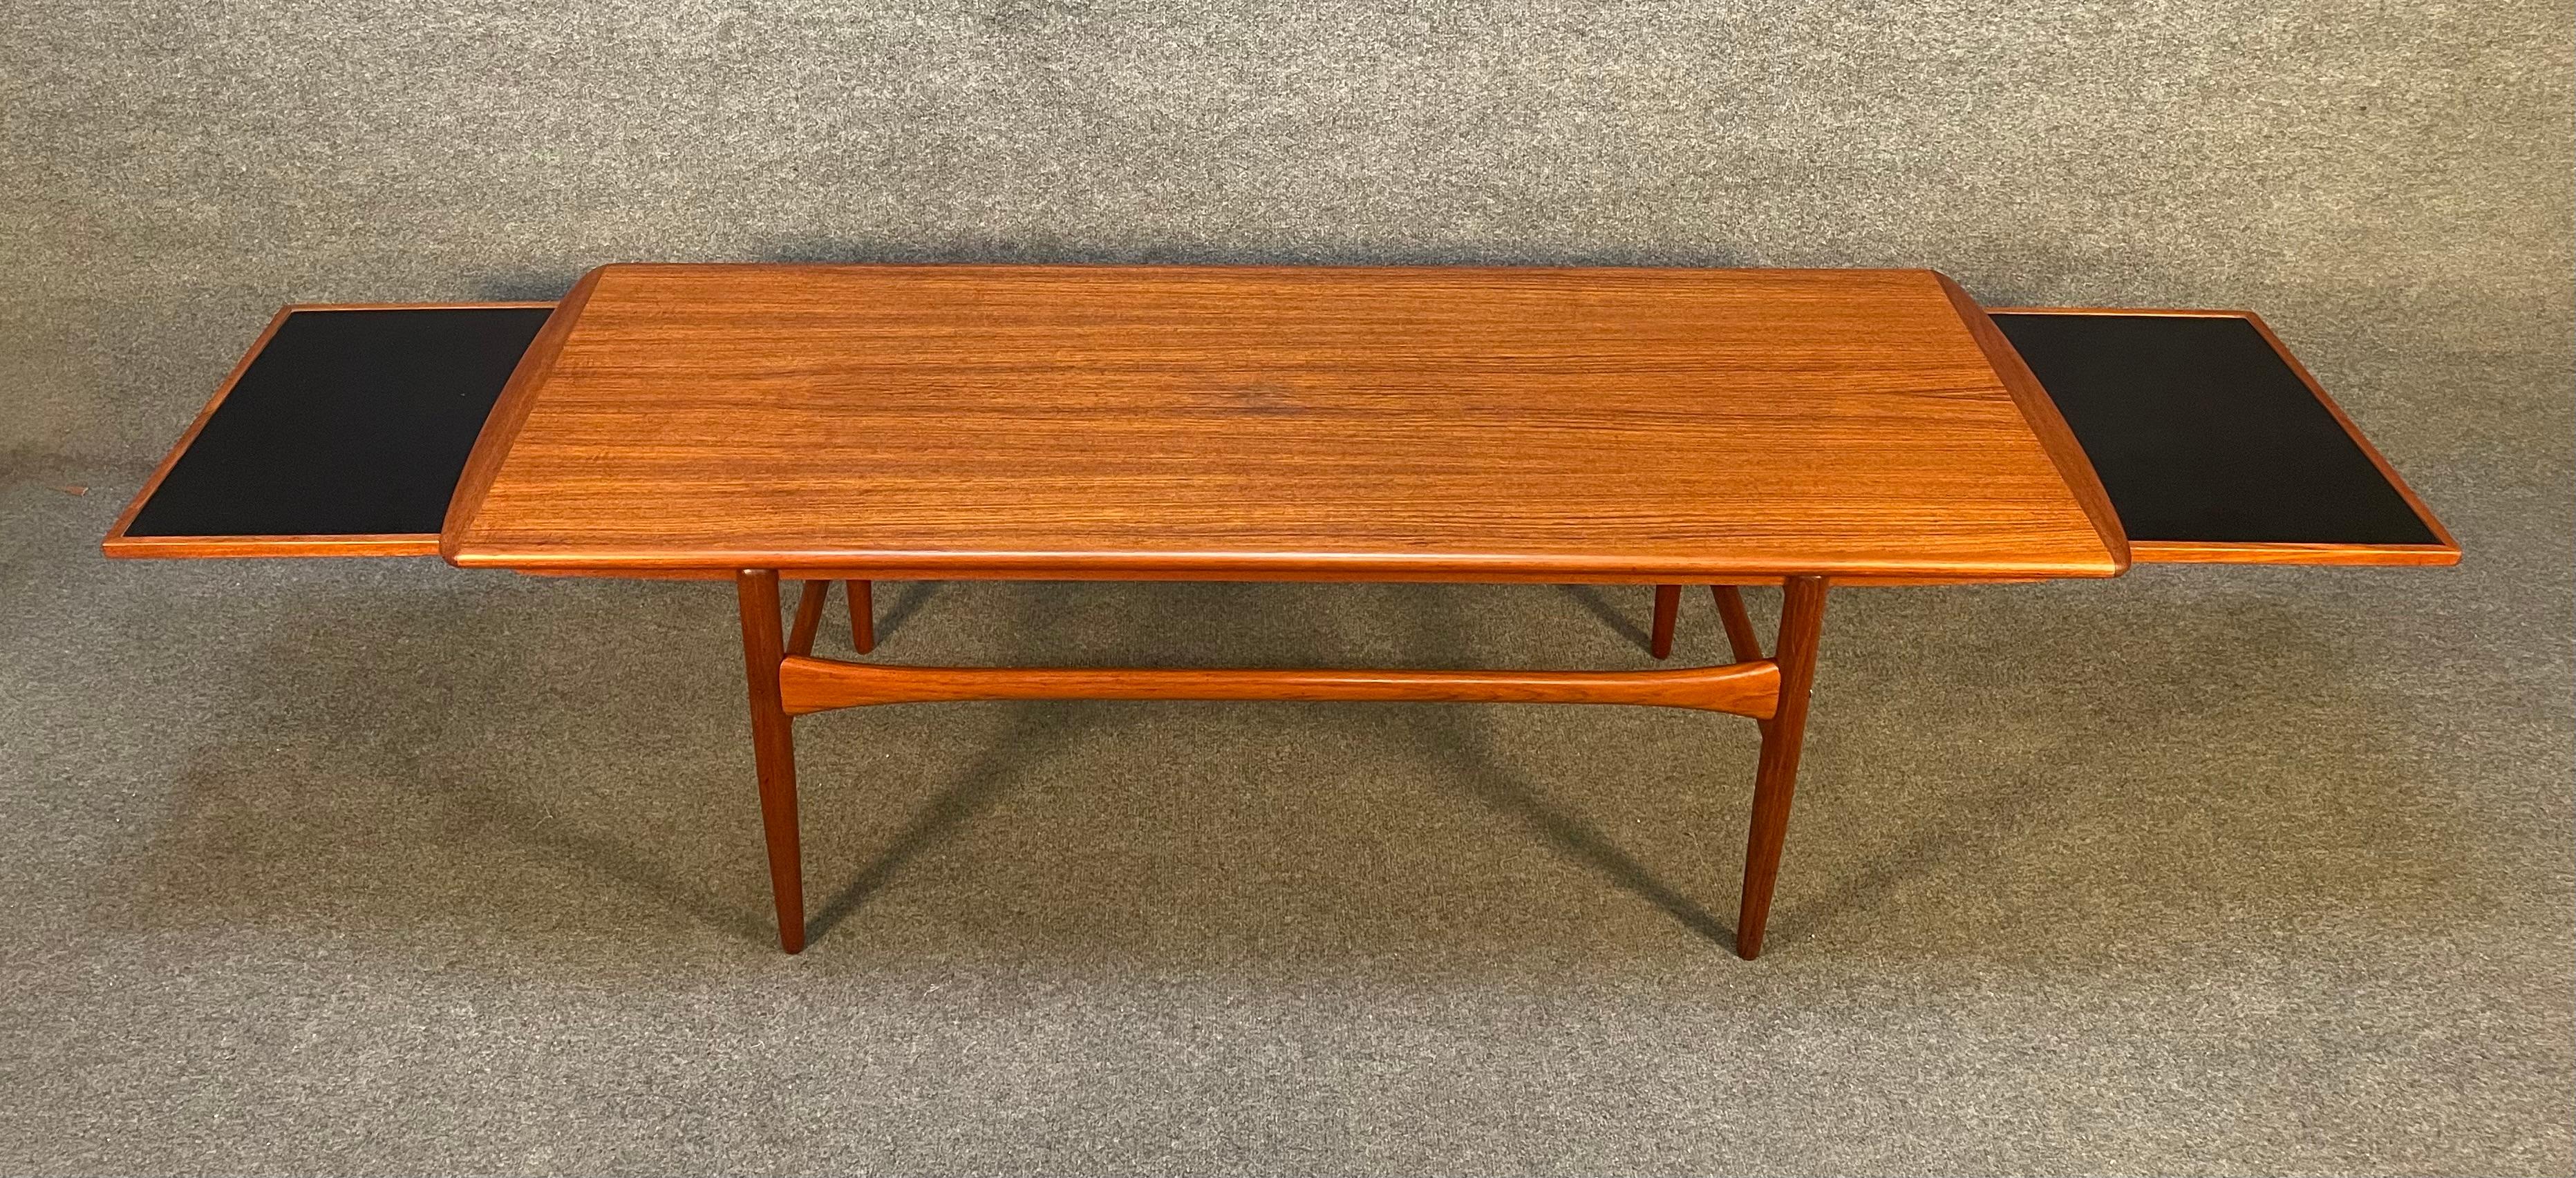 Vintage Danish Mid-Century Modern Teak Coffee Table by Arrebro Mobler In Good Condition For Sale In San Marcos, CA